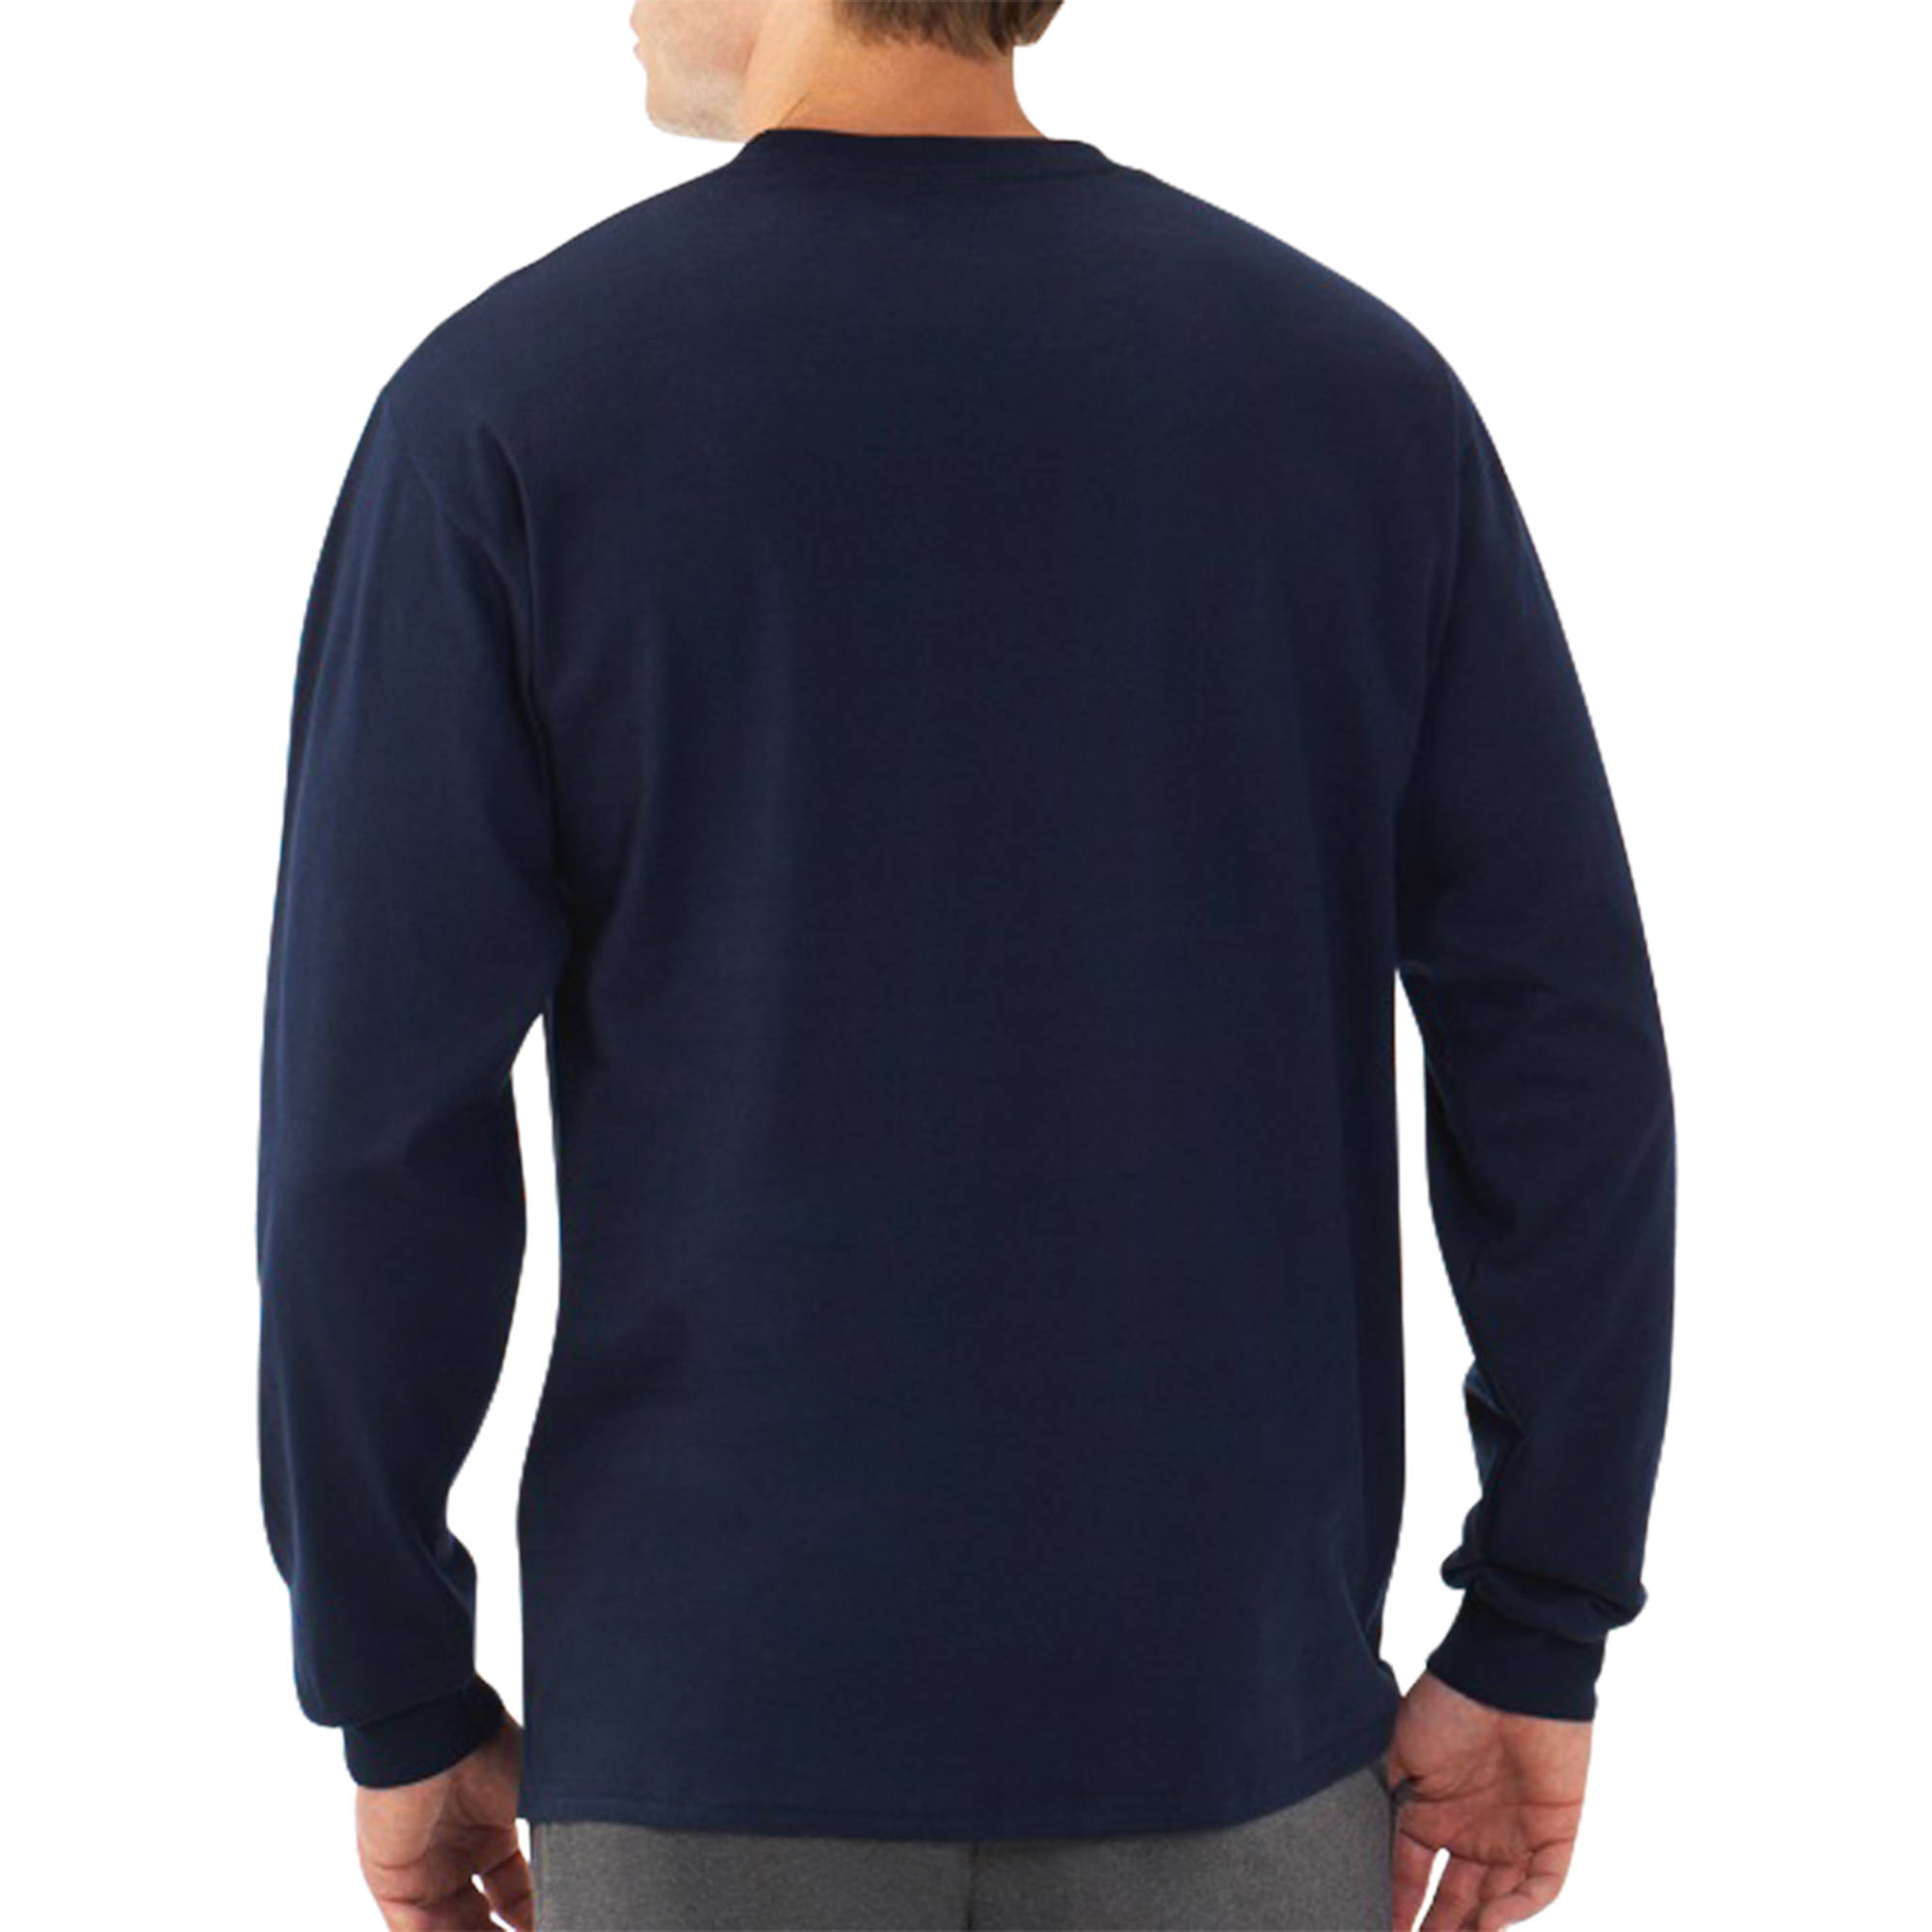 Men's Long Sleeve Crew T Shirt With Rib Cuffs - image 2 of 3